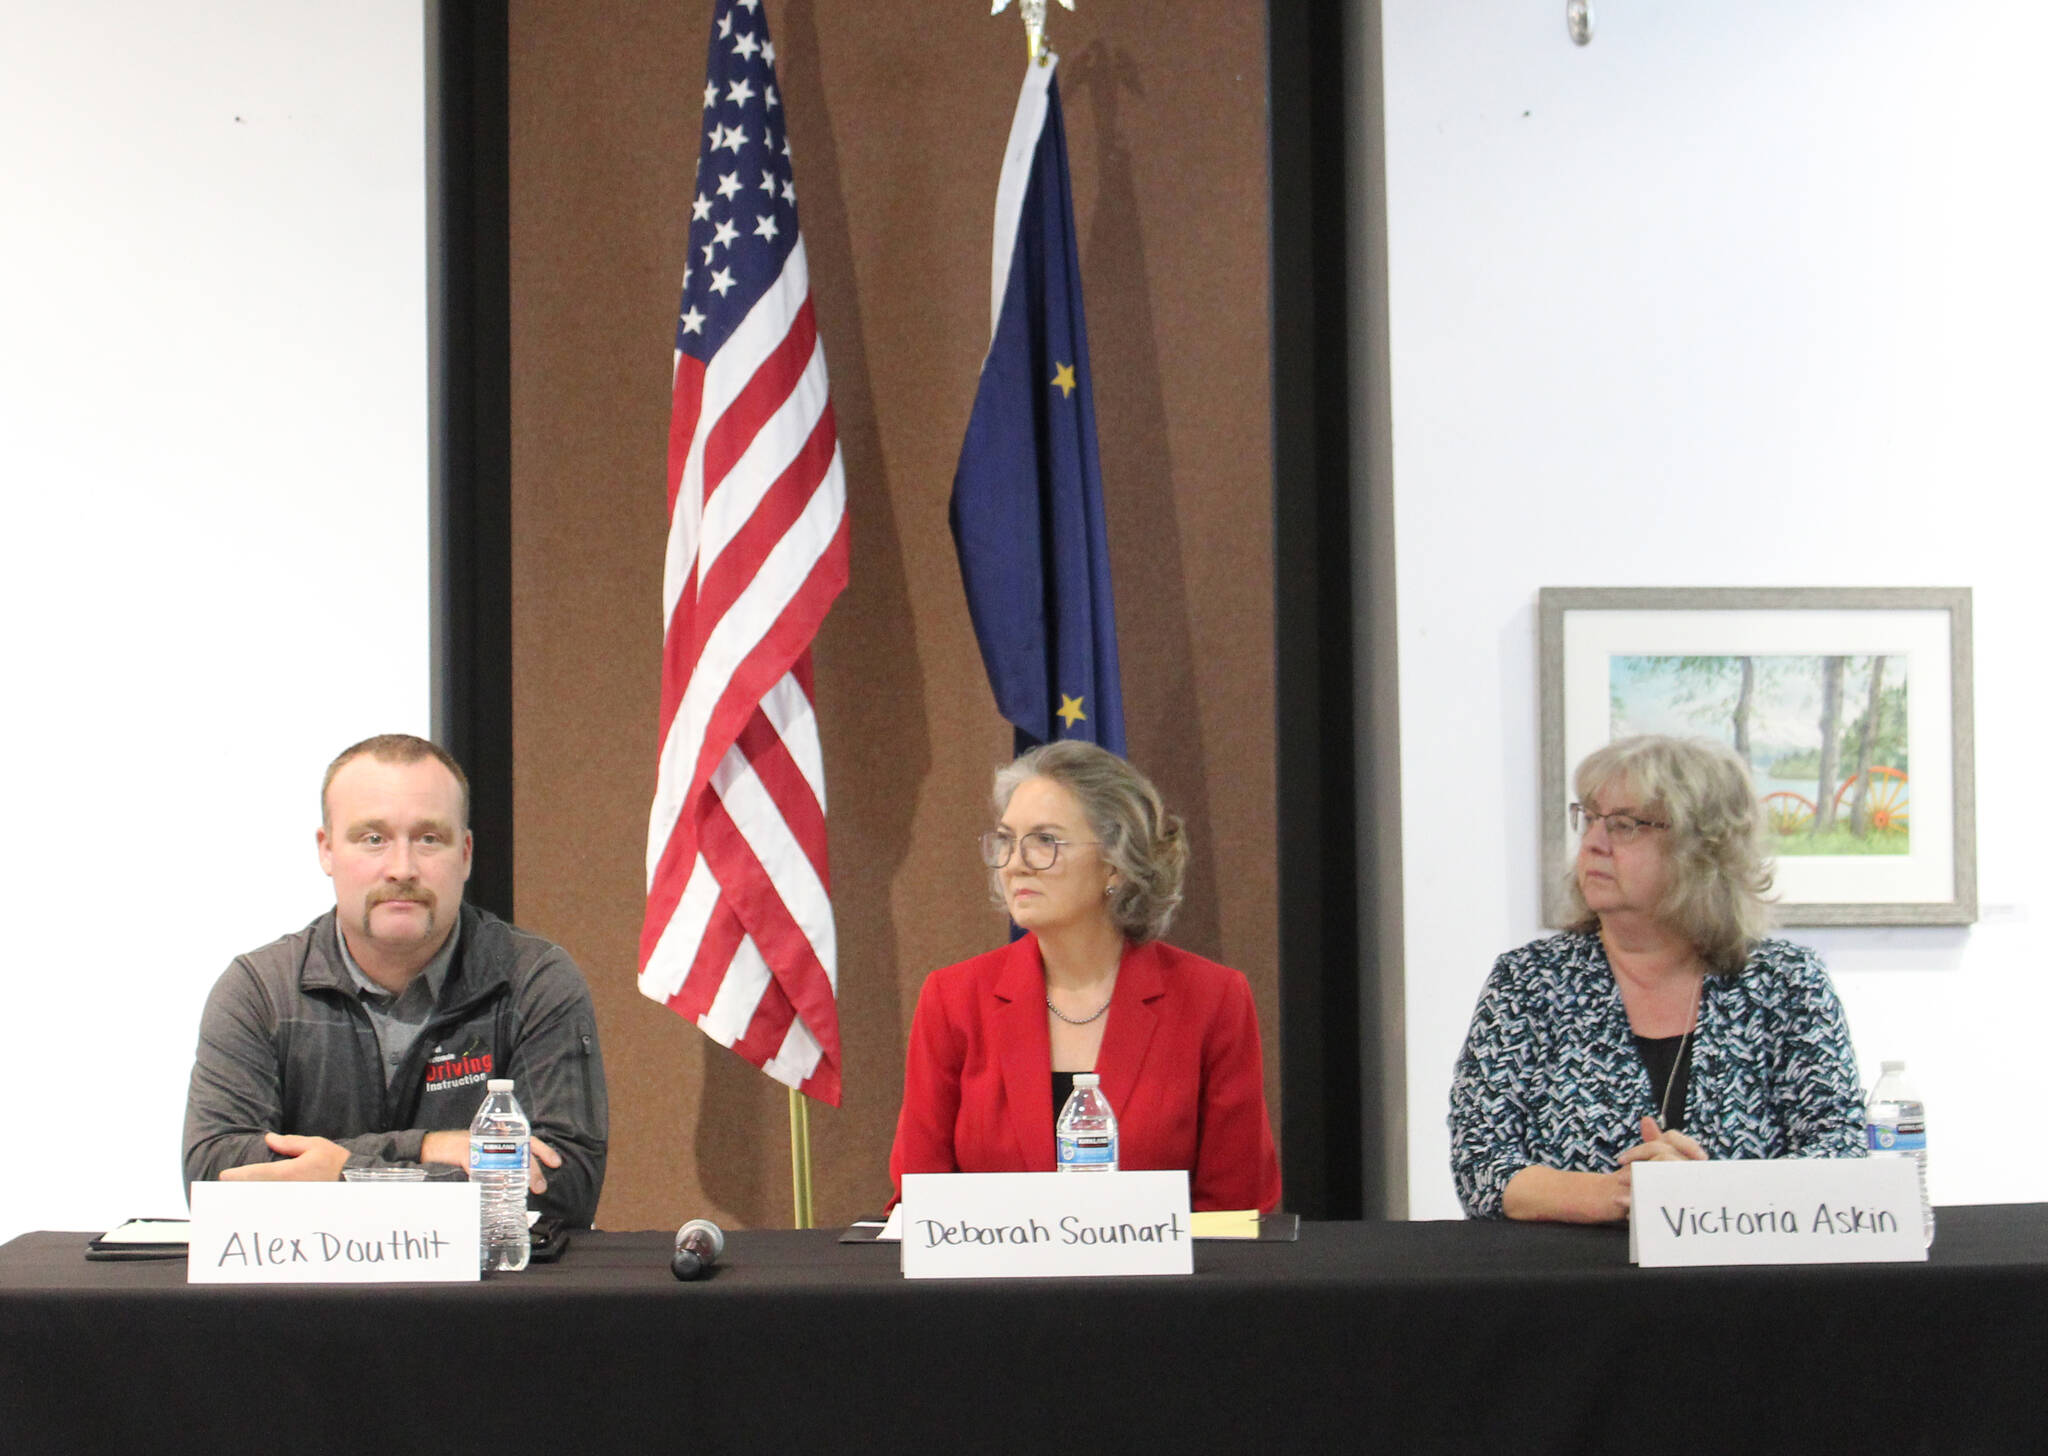 Ashlyn O’Hara / Peninsula Clarion 
From left: Kenai City Council candidates Alex Douthit, Deborah Sounart and Victoria Askin attend an election forum Wednesday at the Kenai Chamber of Commerce and Visitor Center.